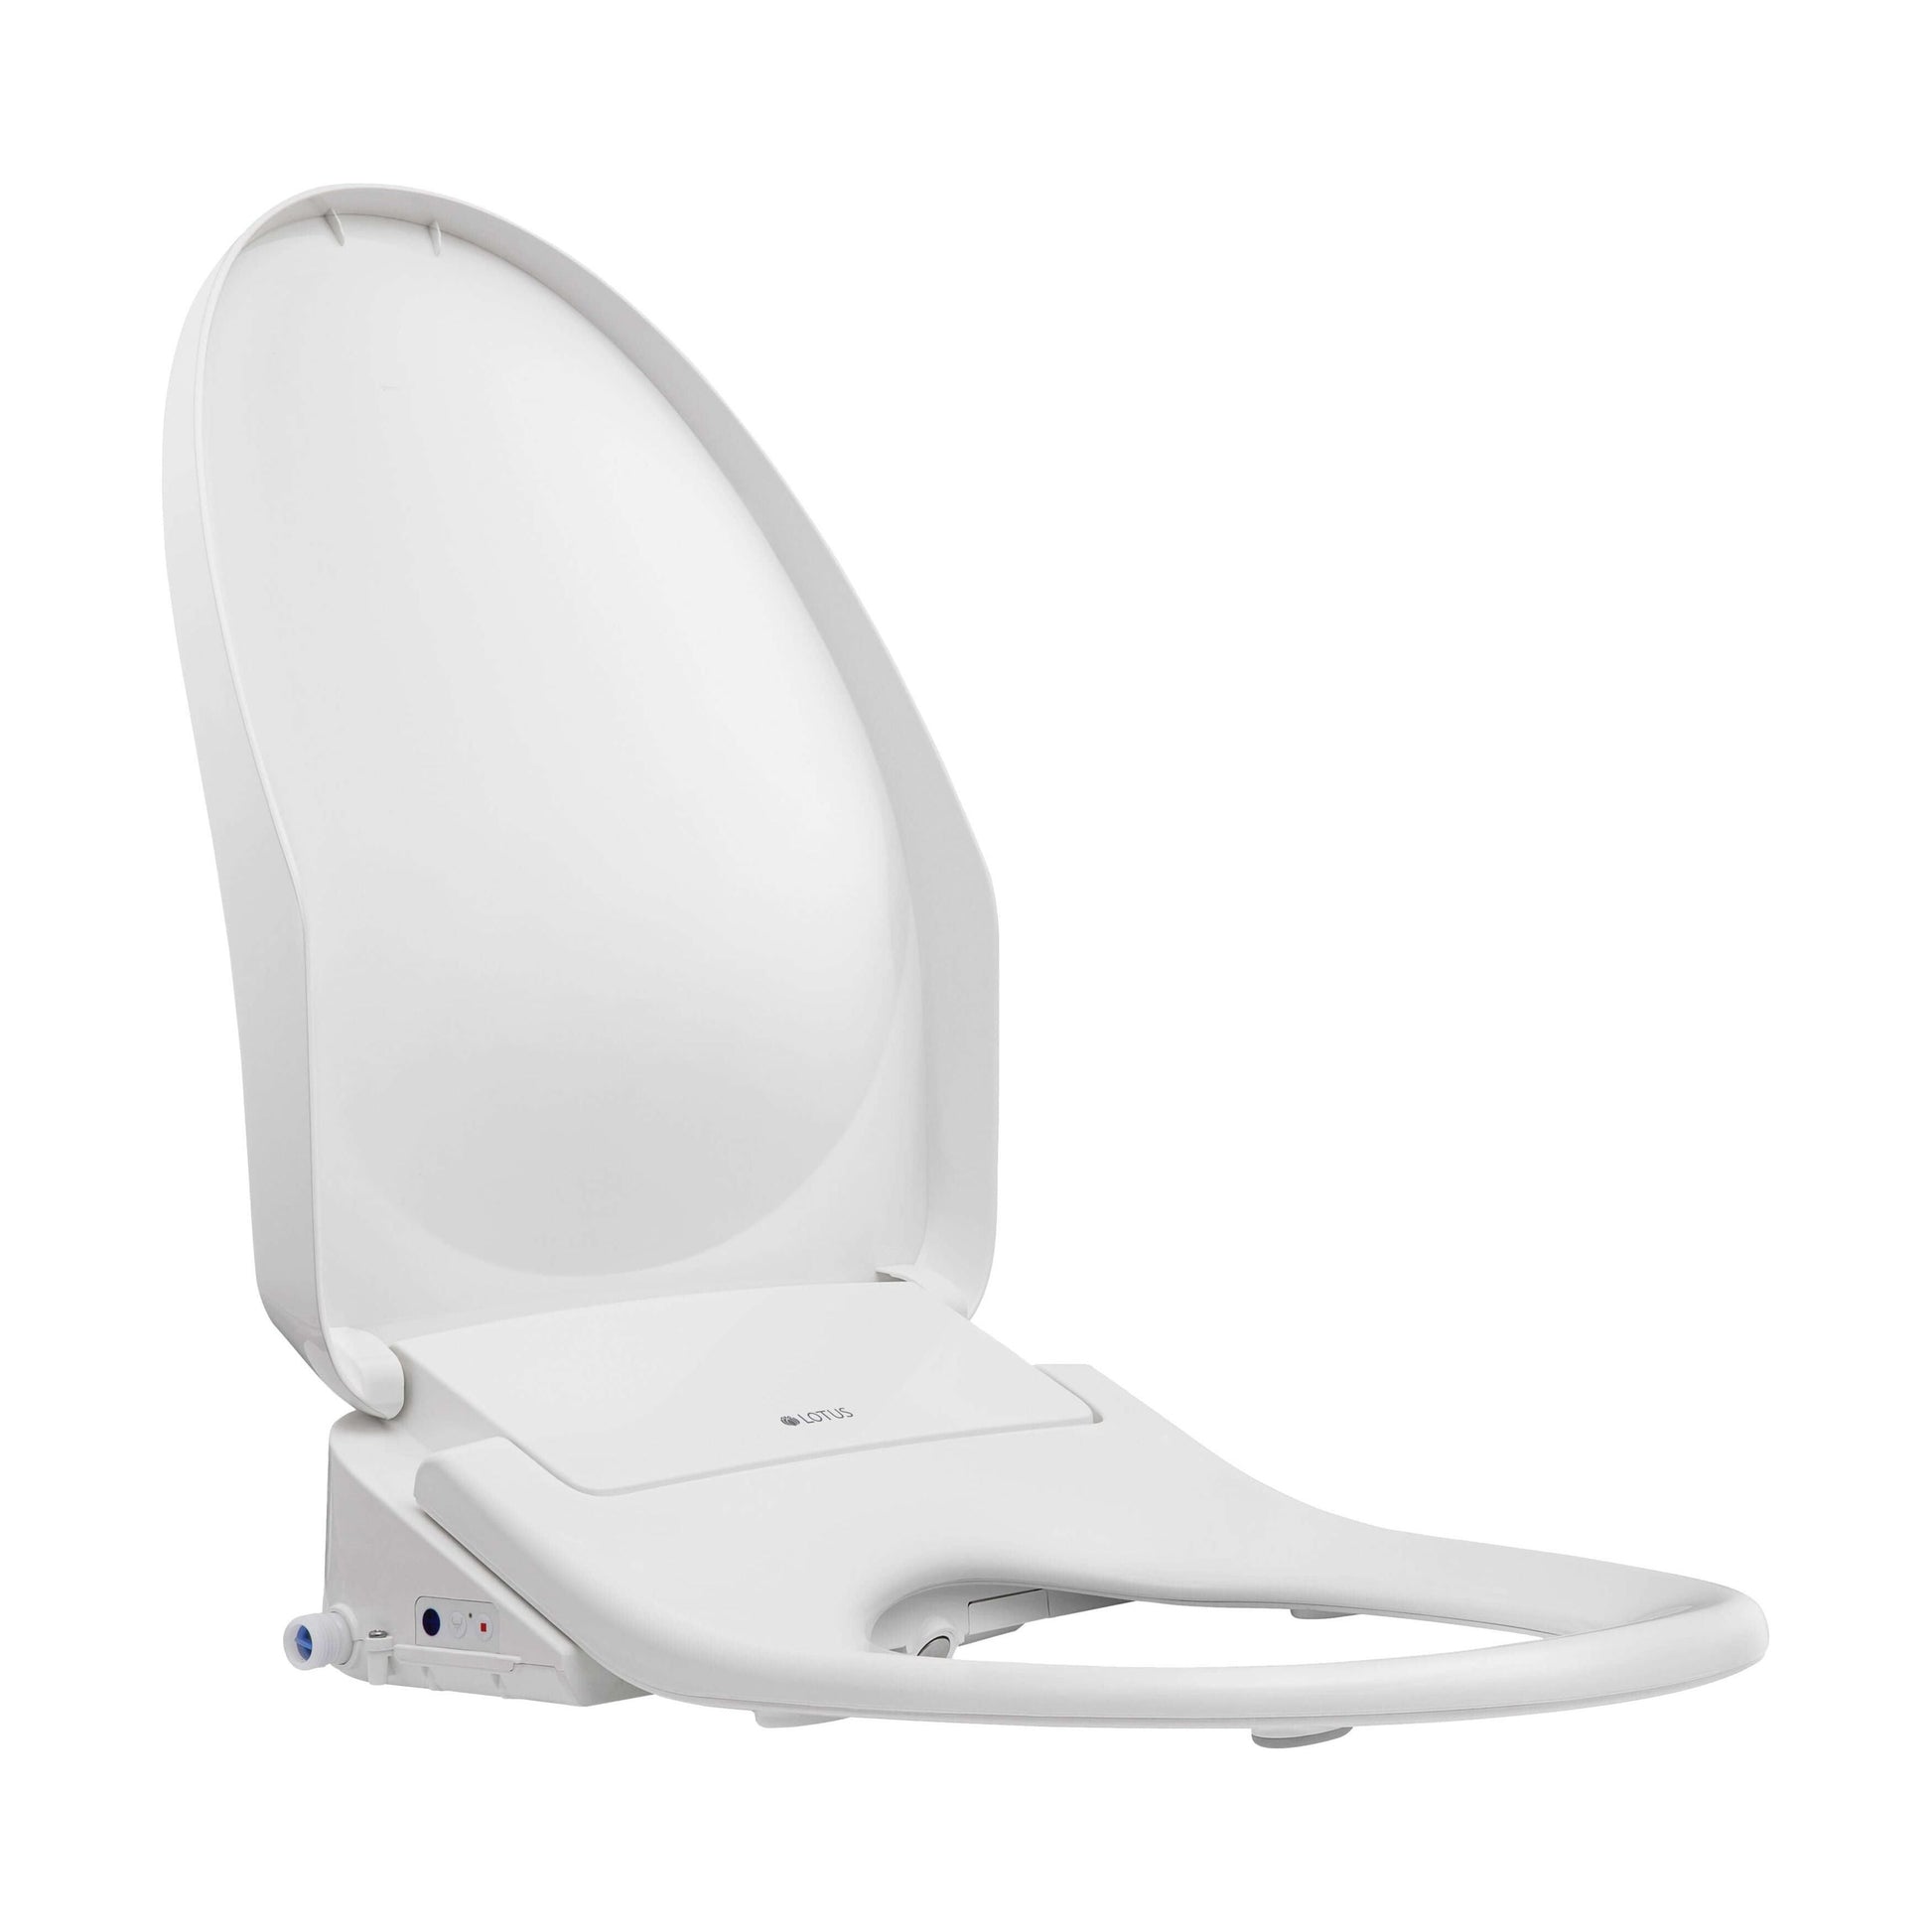 Lotus Bidet Seat ATS-850 - side angled view with lid open